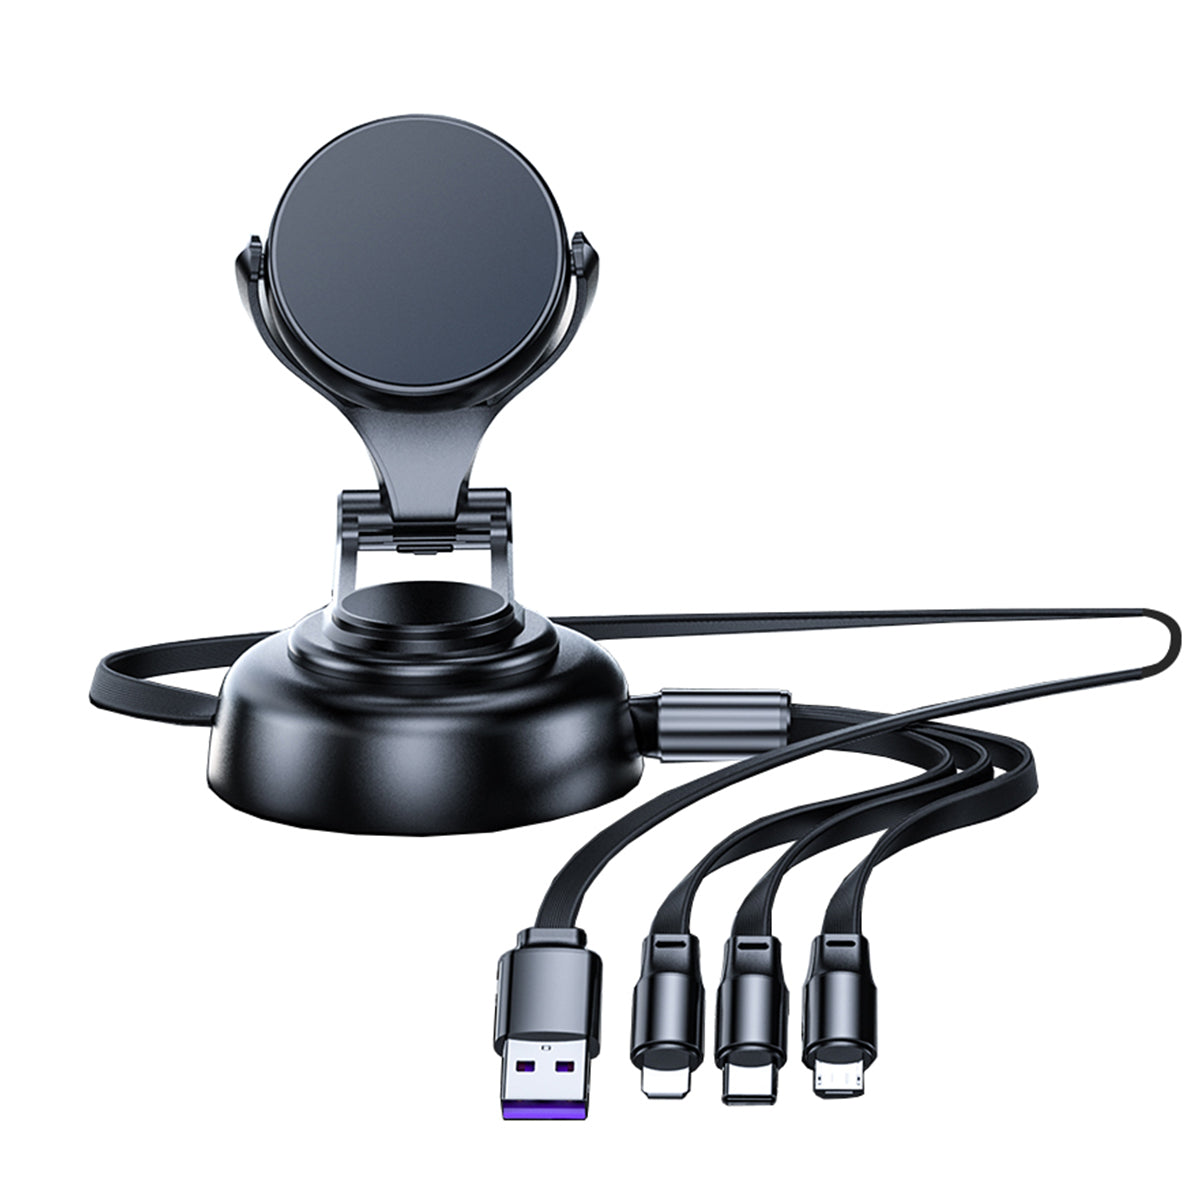 Nfin8 VersaCharge 3-in-1 Magnetic Car Charger